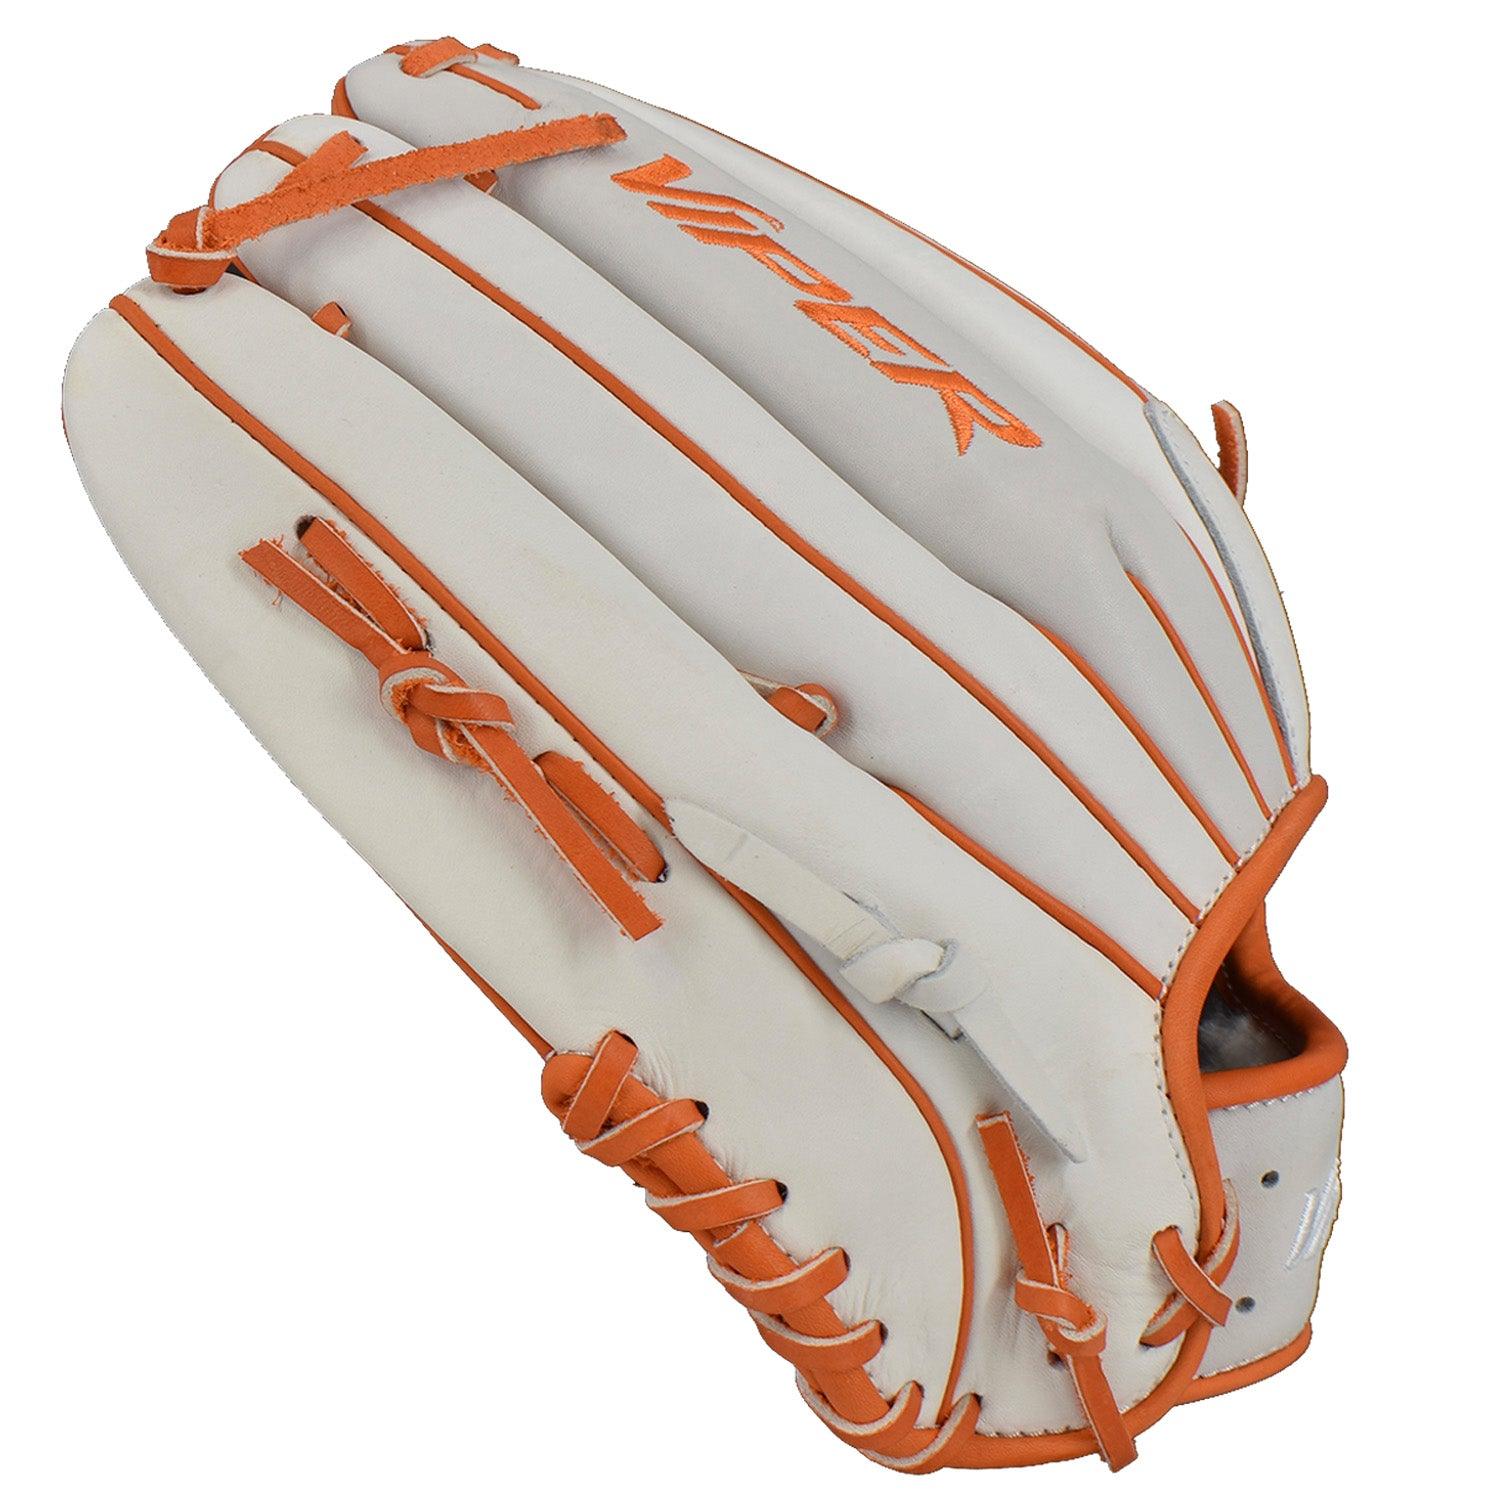 Viper Premium Leather Slowpitch Softball Fielding Glove – Game Ready Edition - VIP-H-SL-W-OR-001 - Smash It Sports